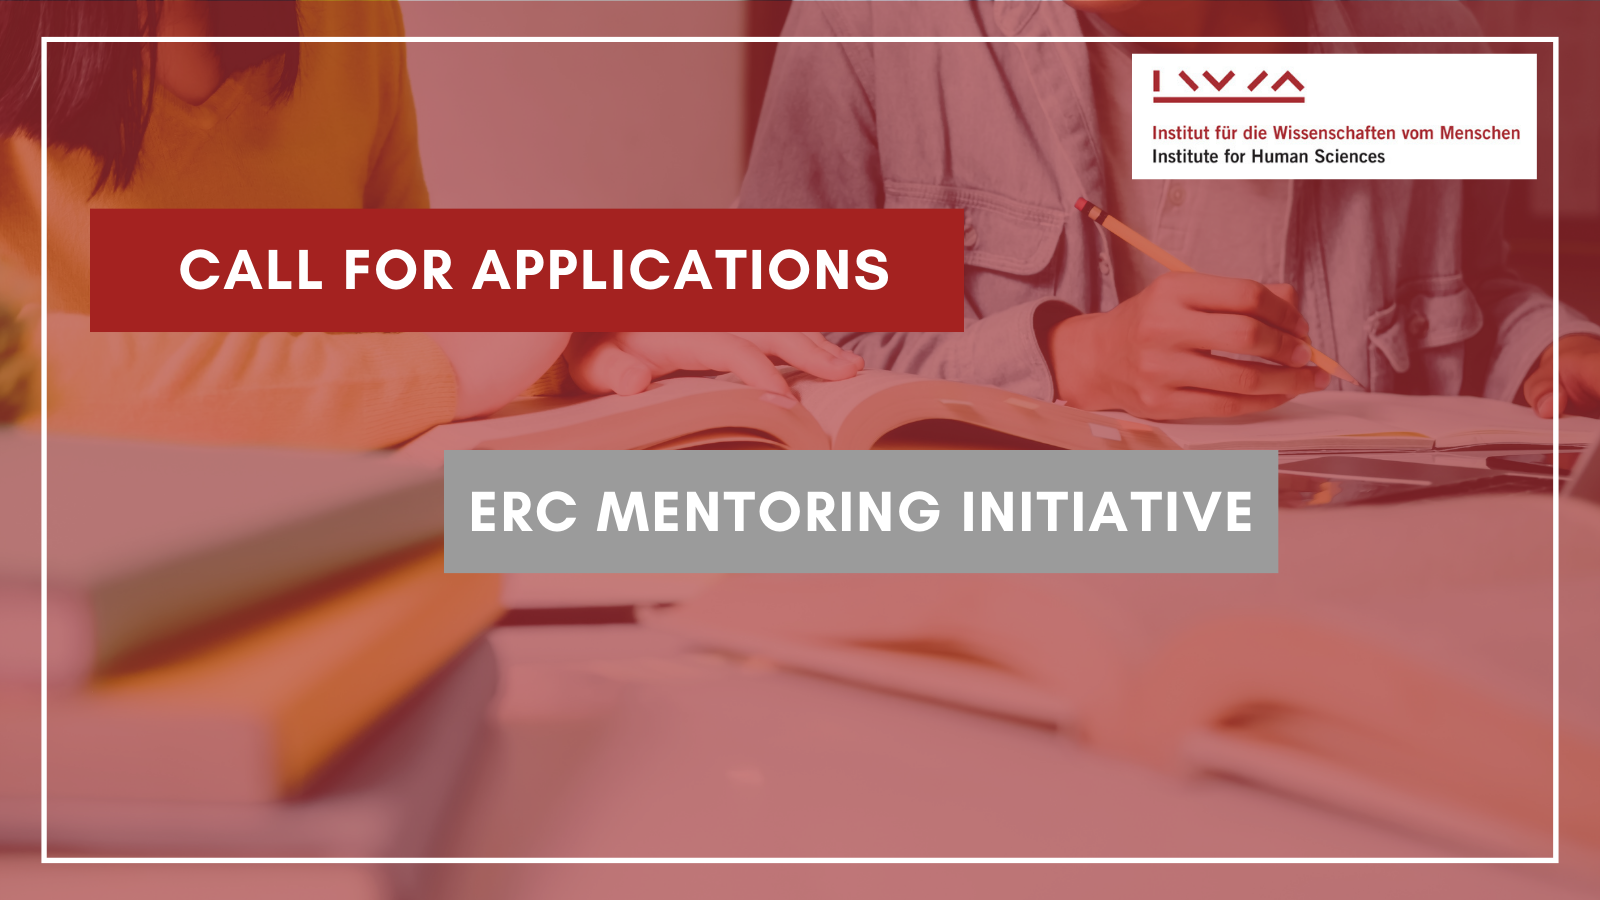 Call for Application for the ERC Mentoring Initiative with 2 people working in the background